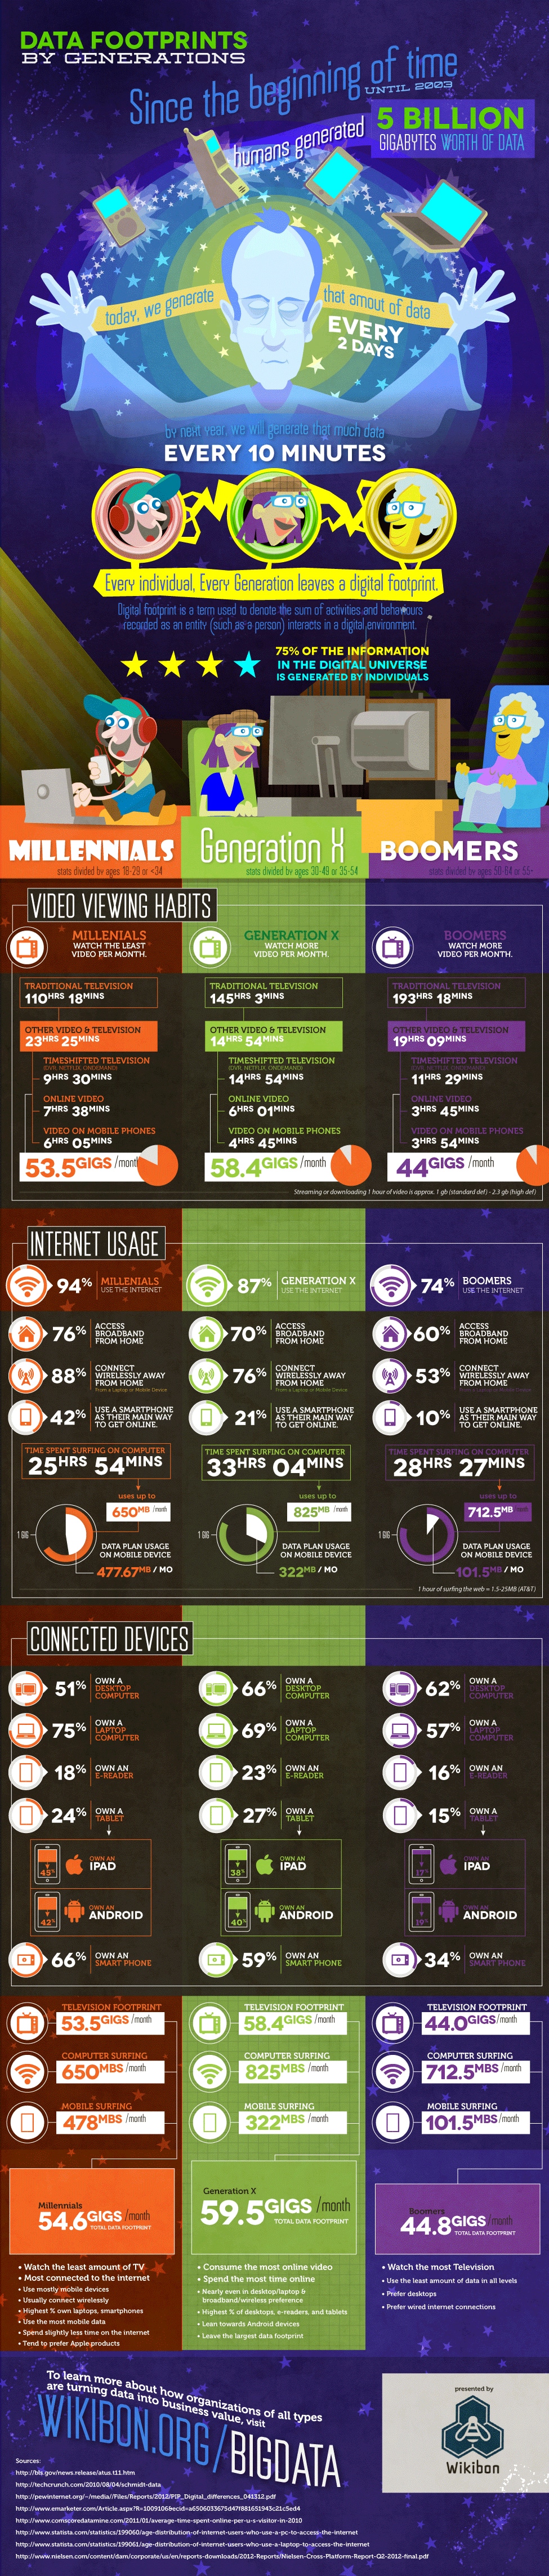 digital-footprints-by-generations-infographic